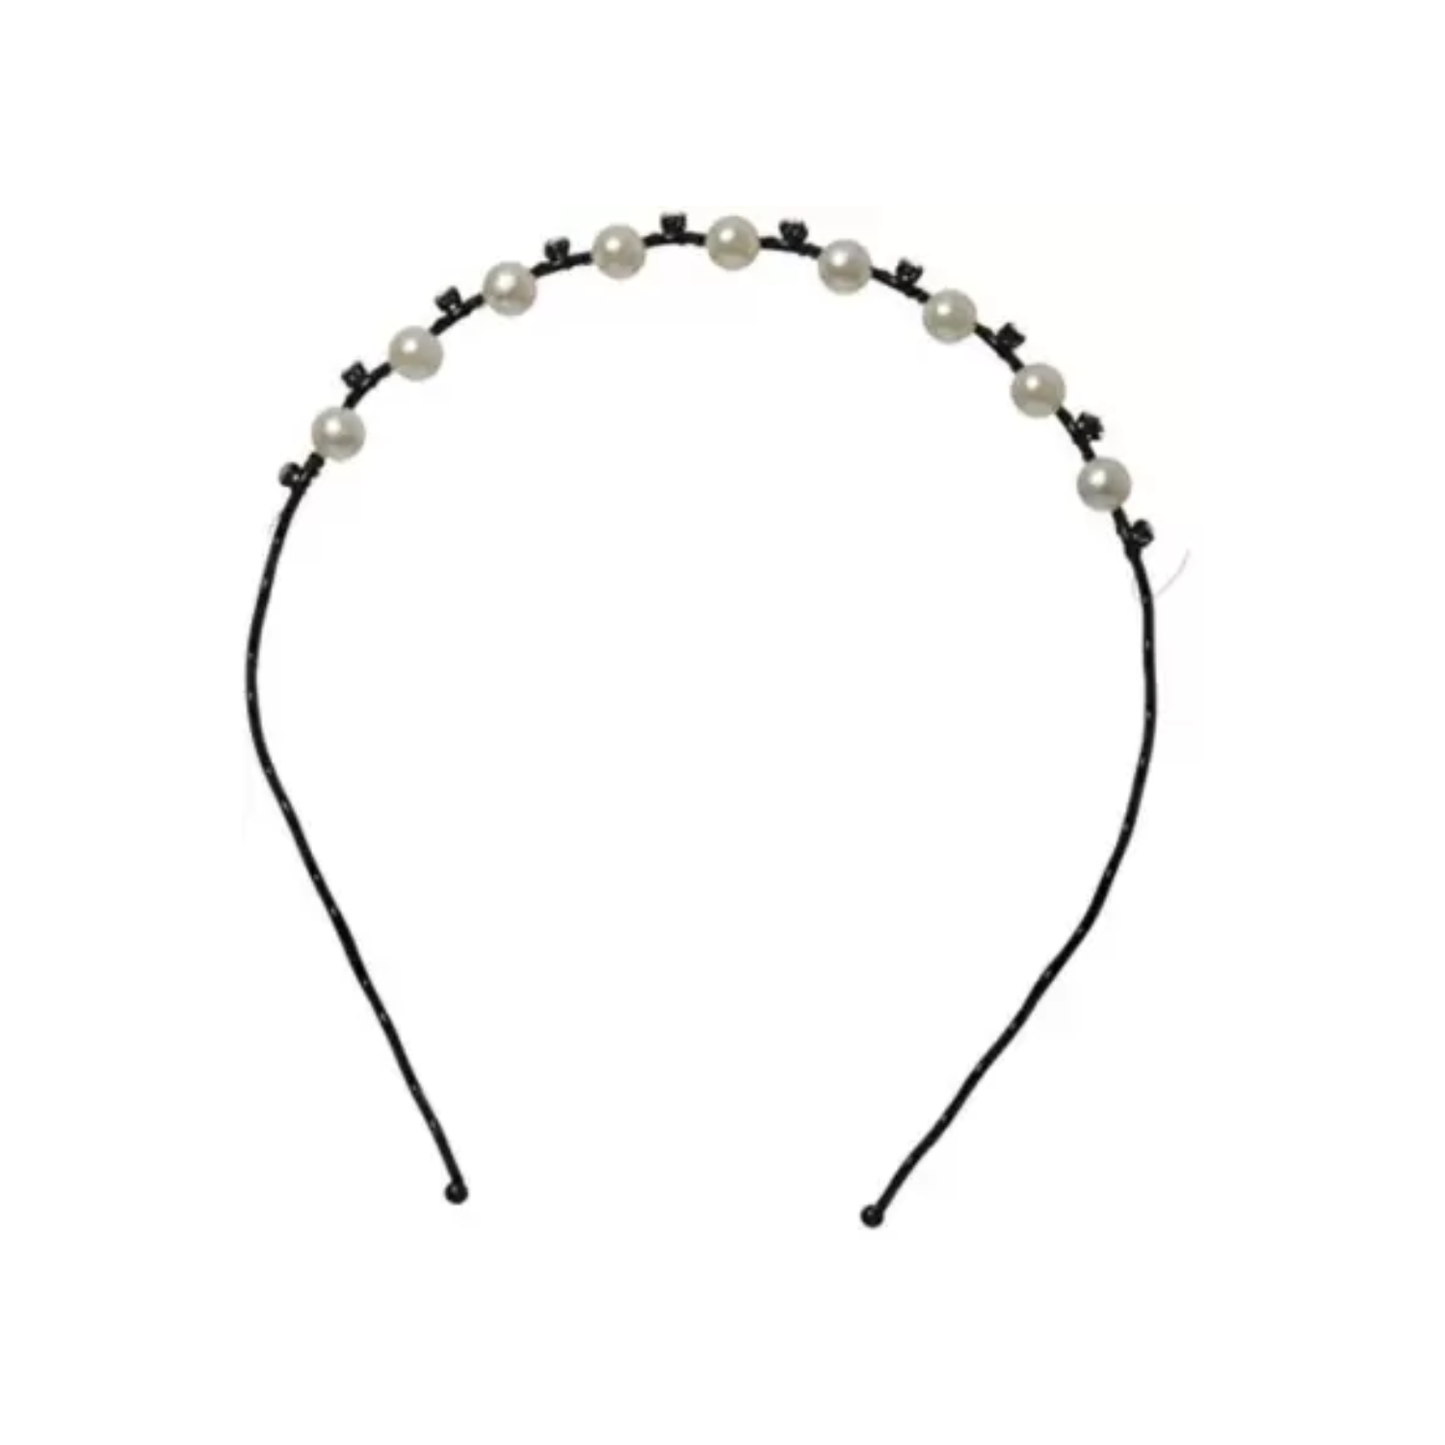 Hair Band, Hair Band For Women With Pearl & Rhinestone Black For Girls (black)